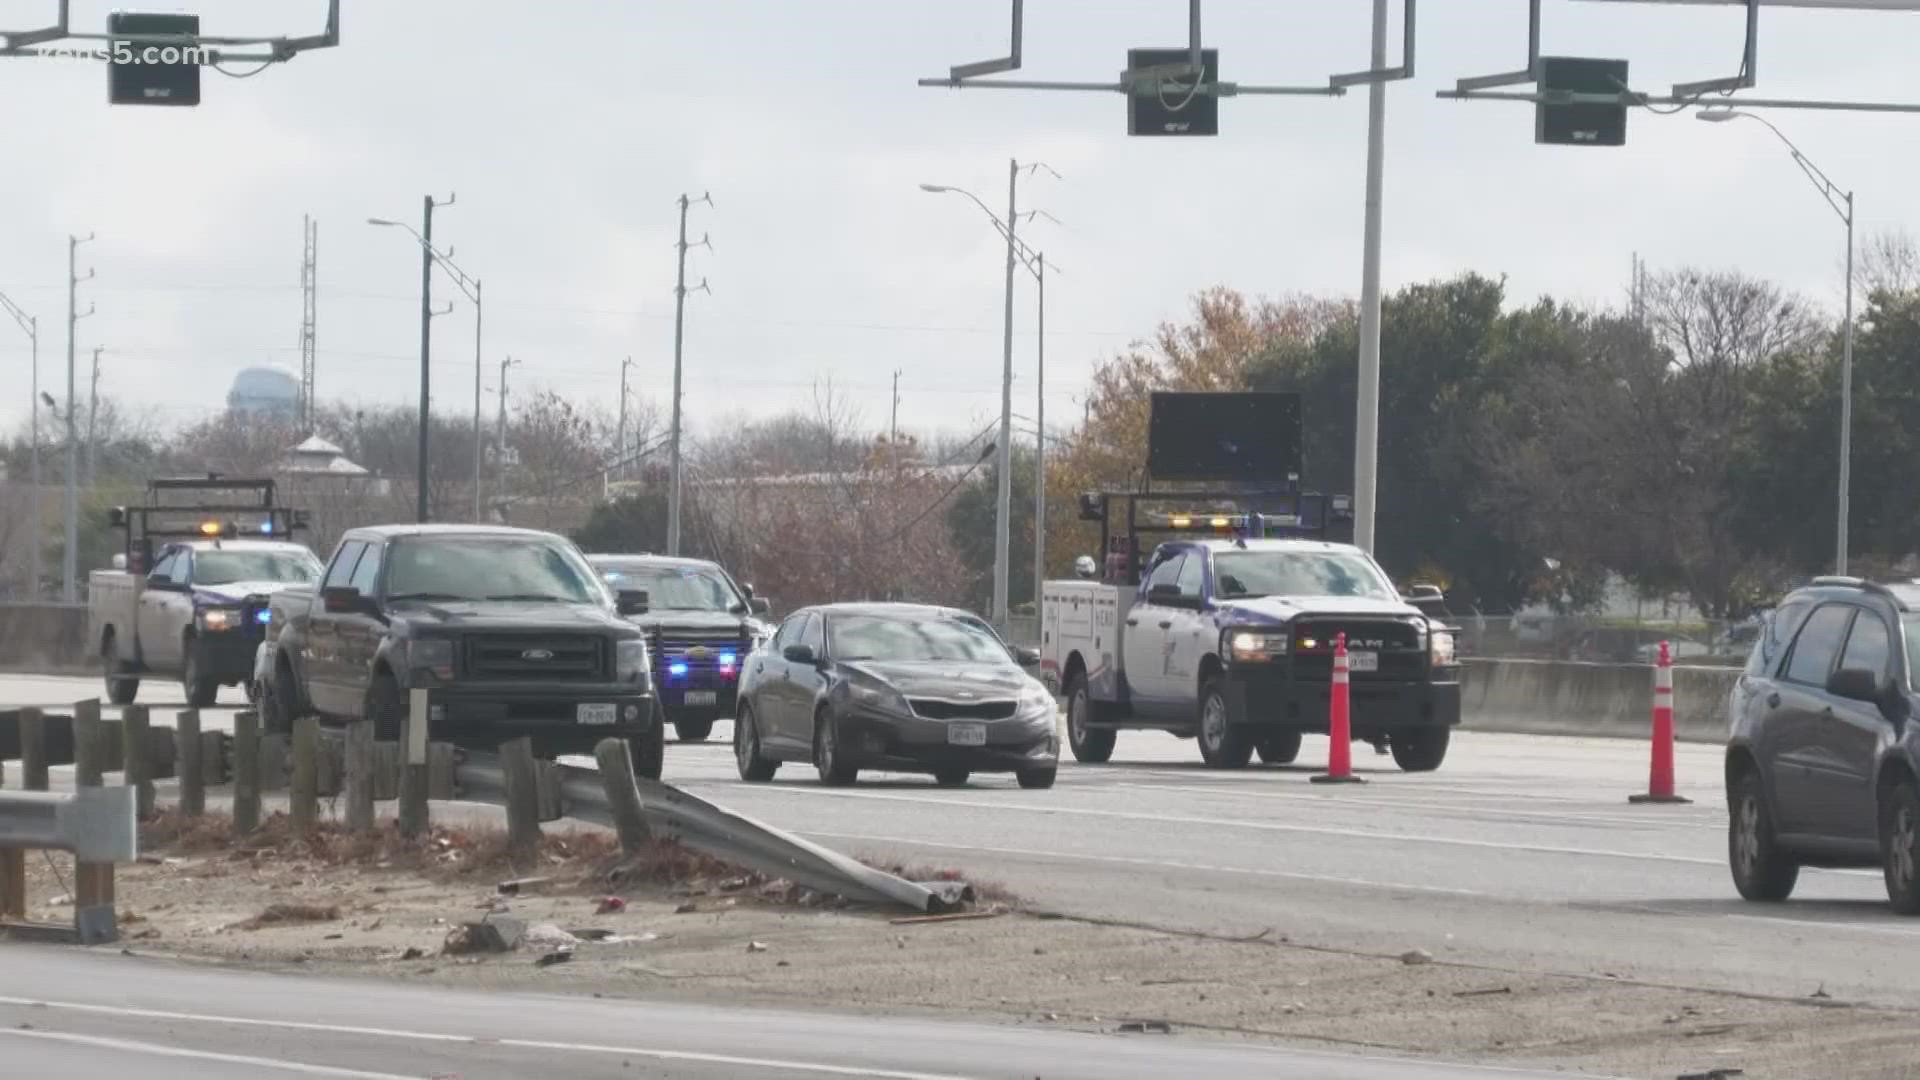 Officers were called out to the area of Highway 90 and Highway 151 for a report of a traffic accident around 10 a.m.